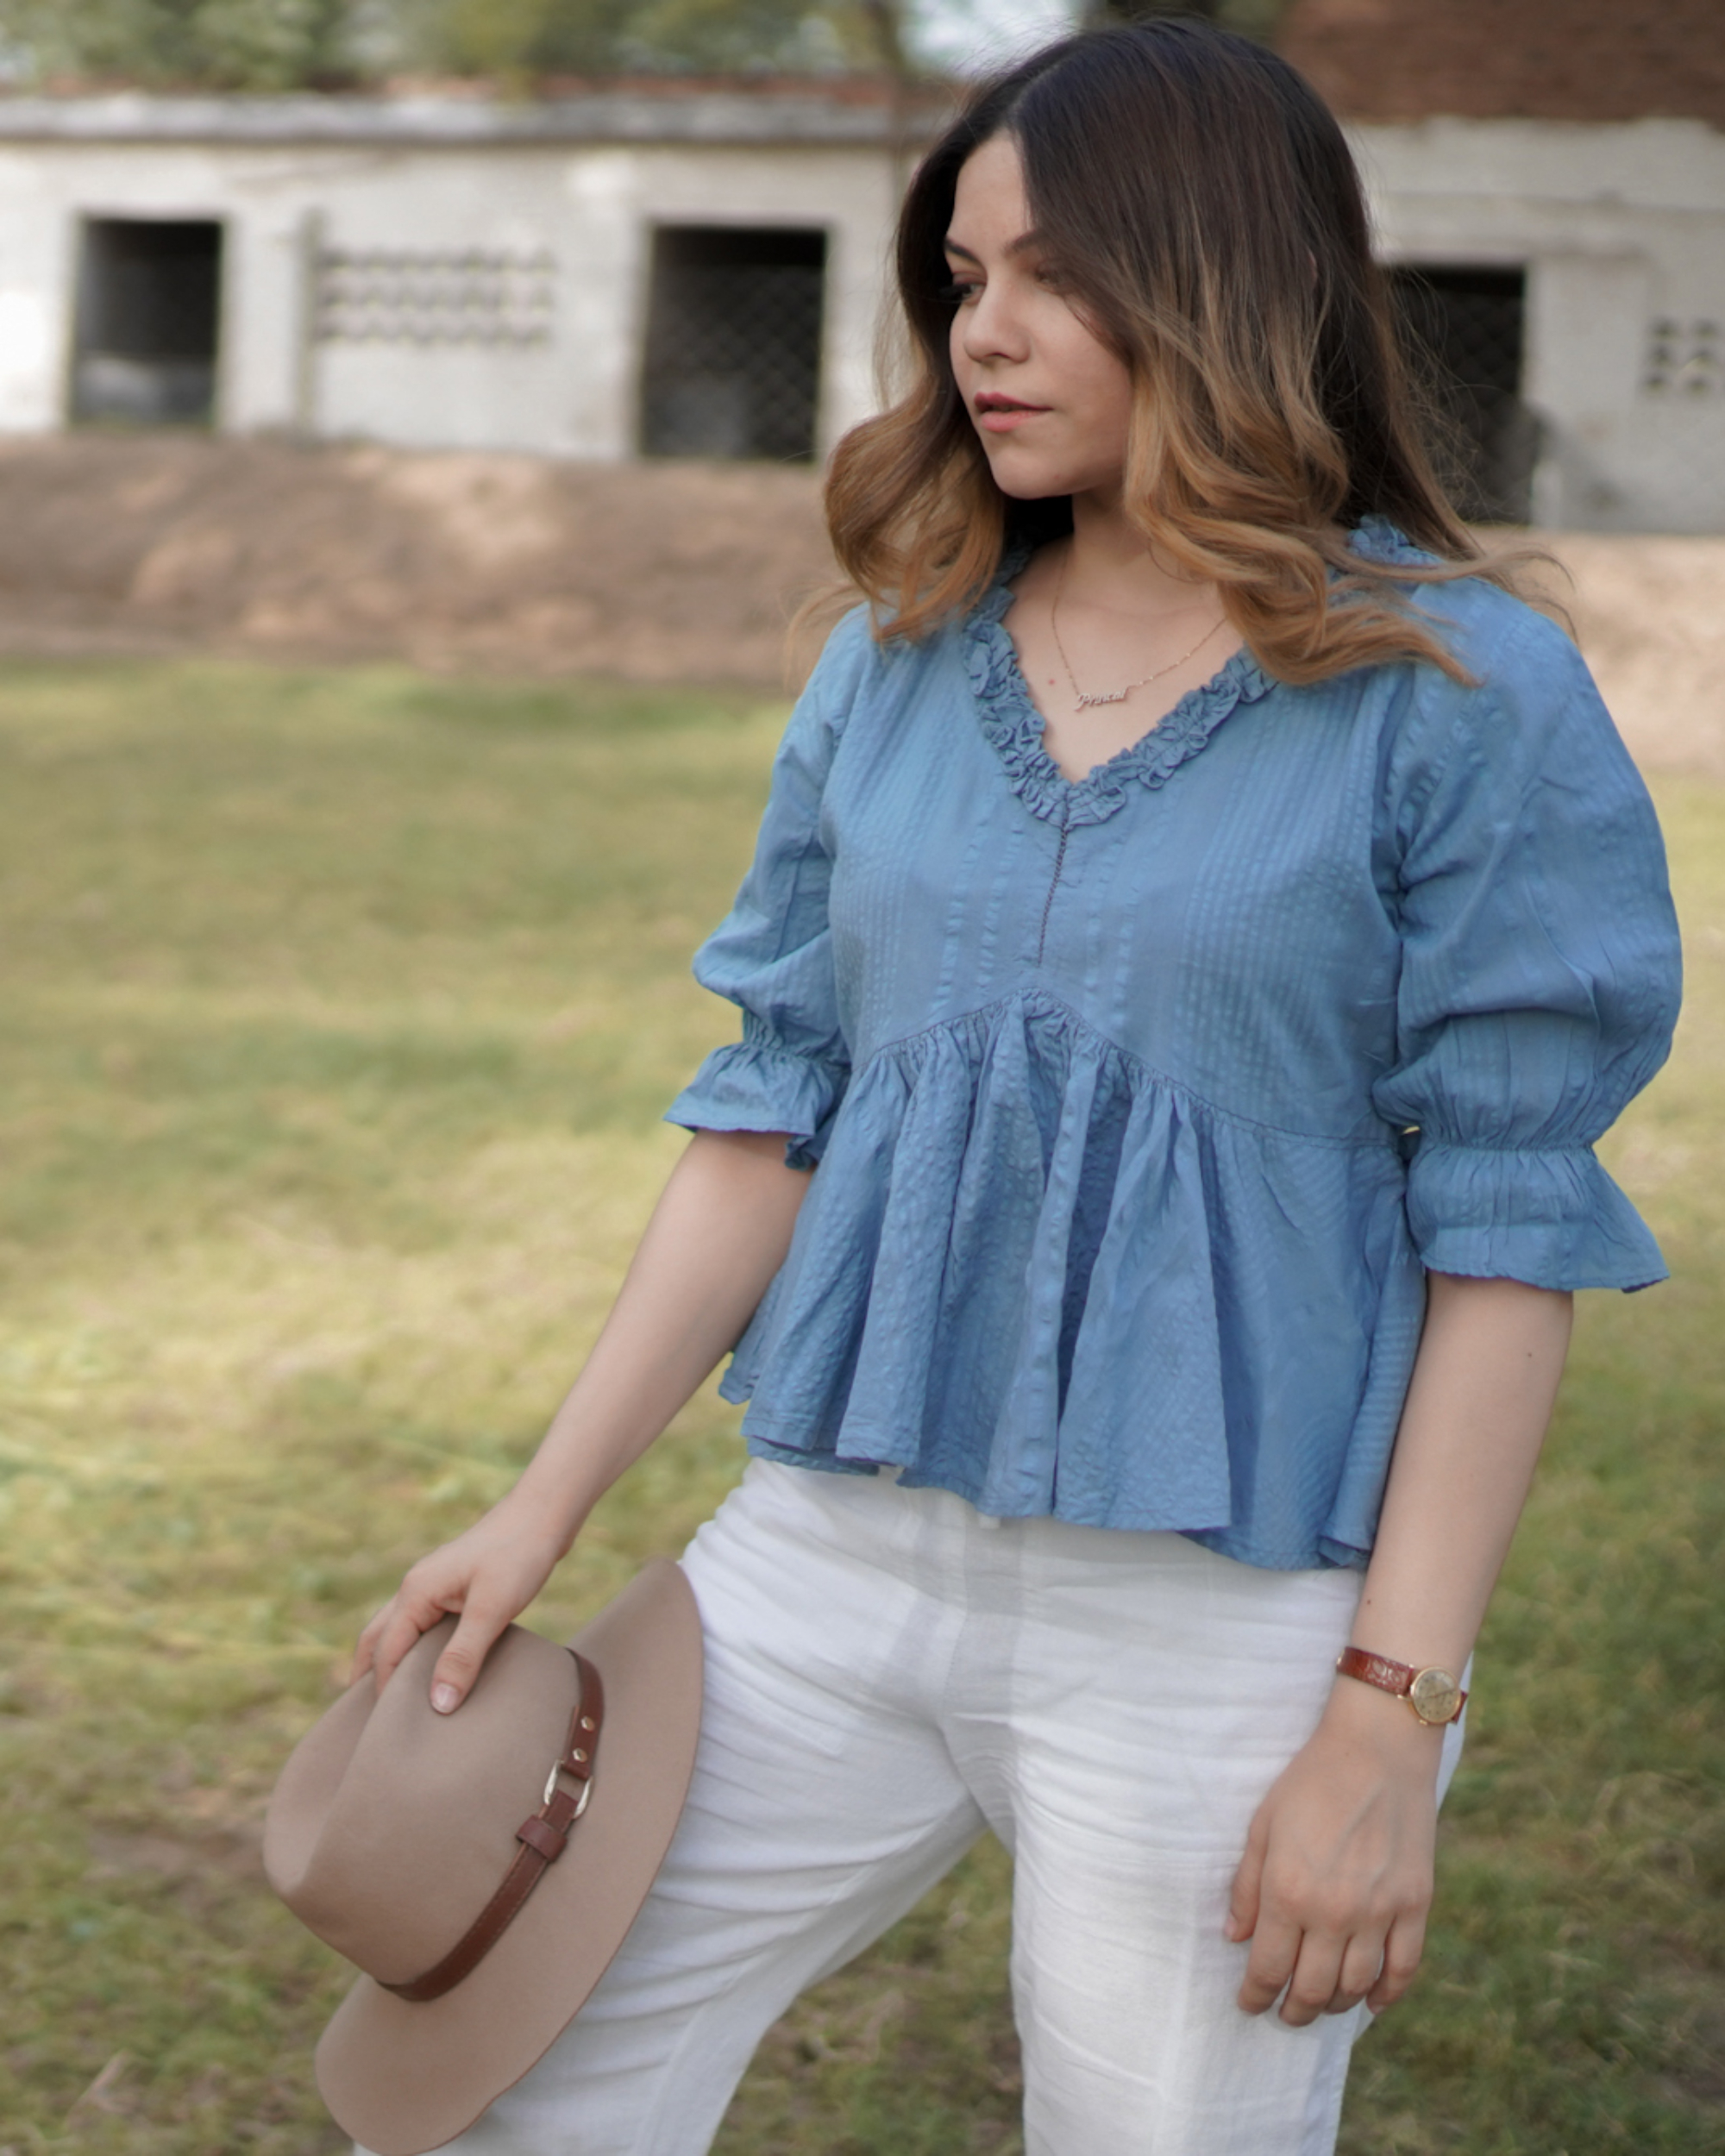 Dusty blue ruffle neck top by Increscent